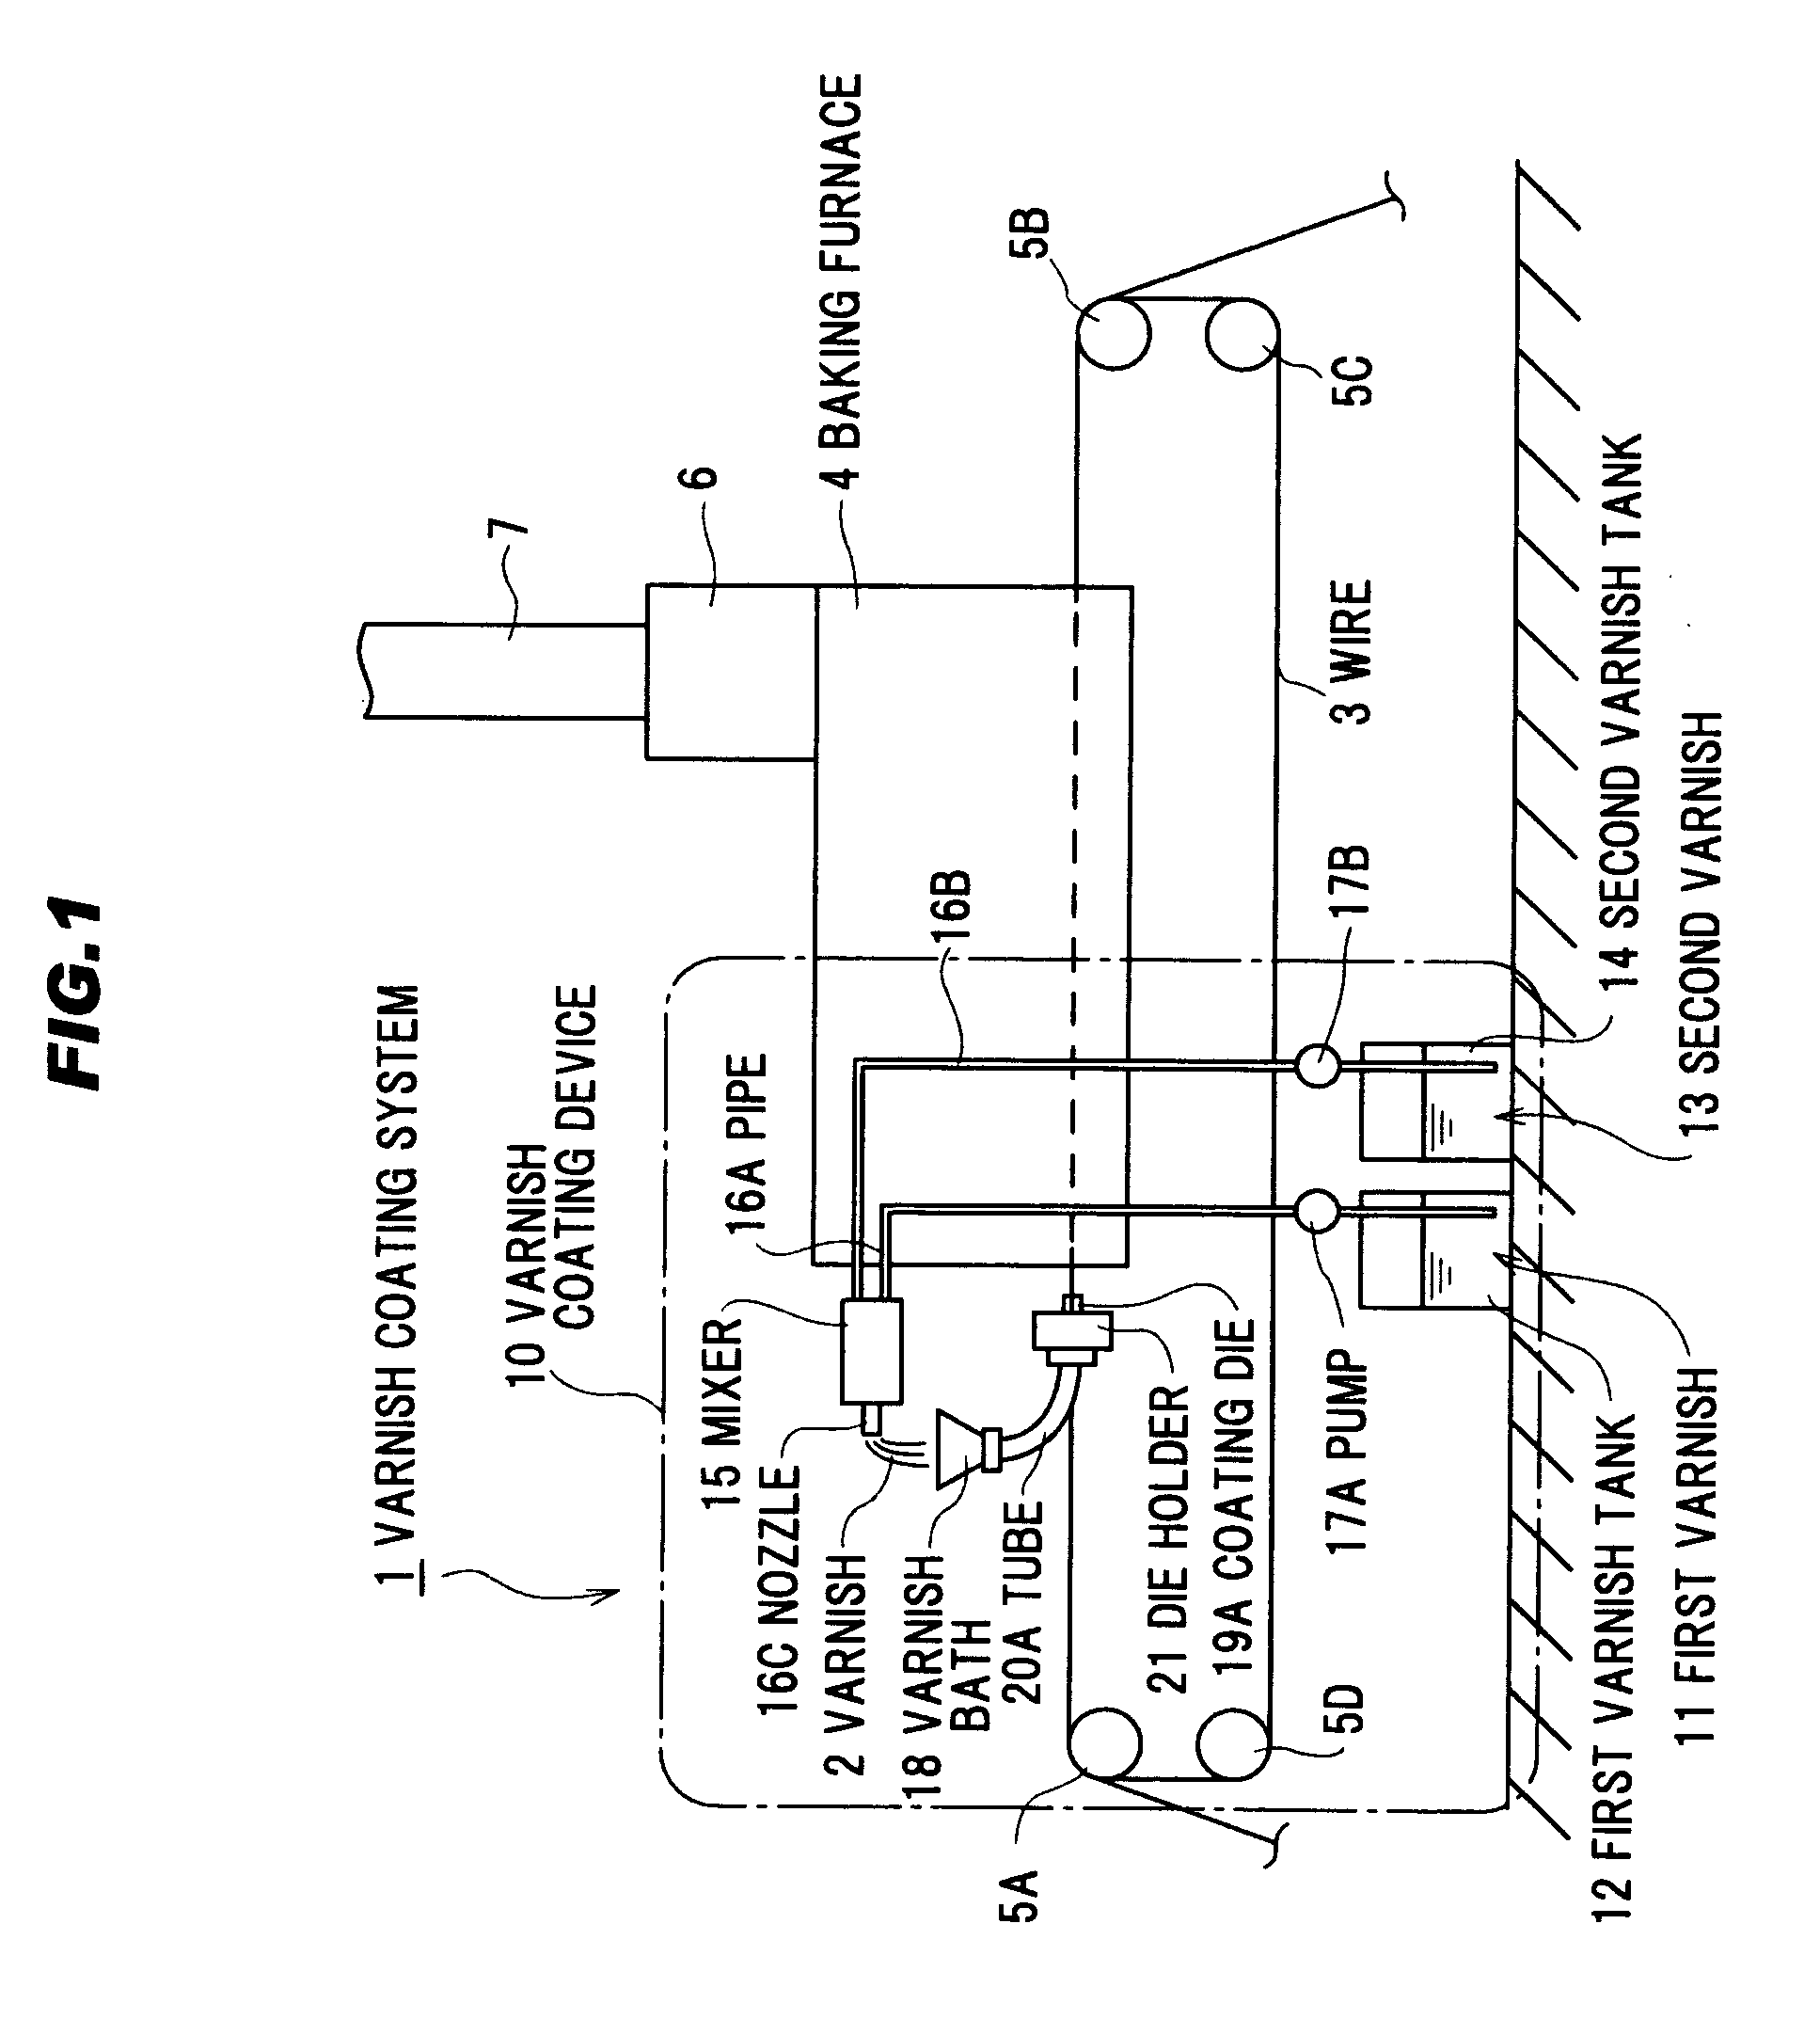 Varnish coating device and method for coating a varnish